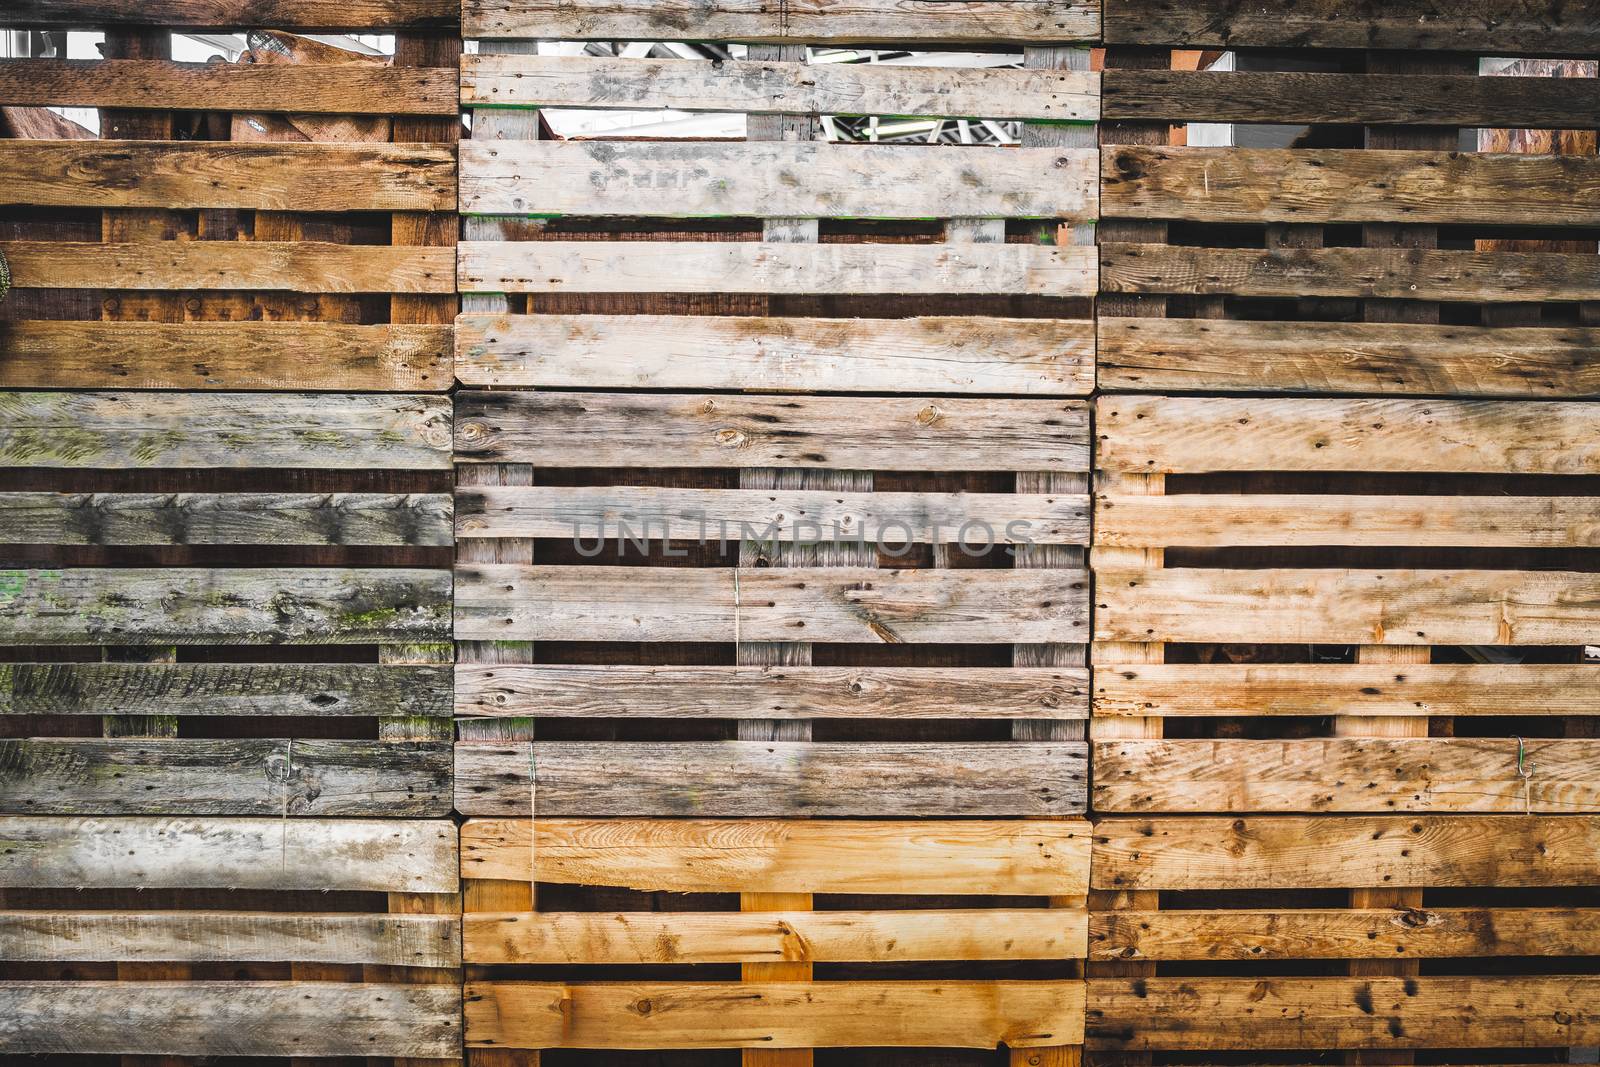 pallets texture grunge copy space wooden background warehouse wallpaper by LucaLorenzelli